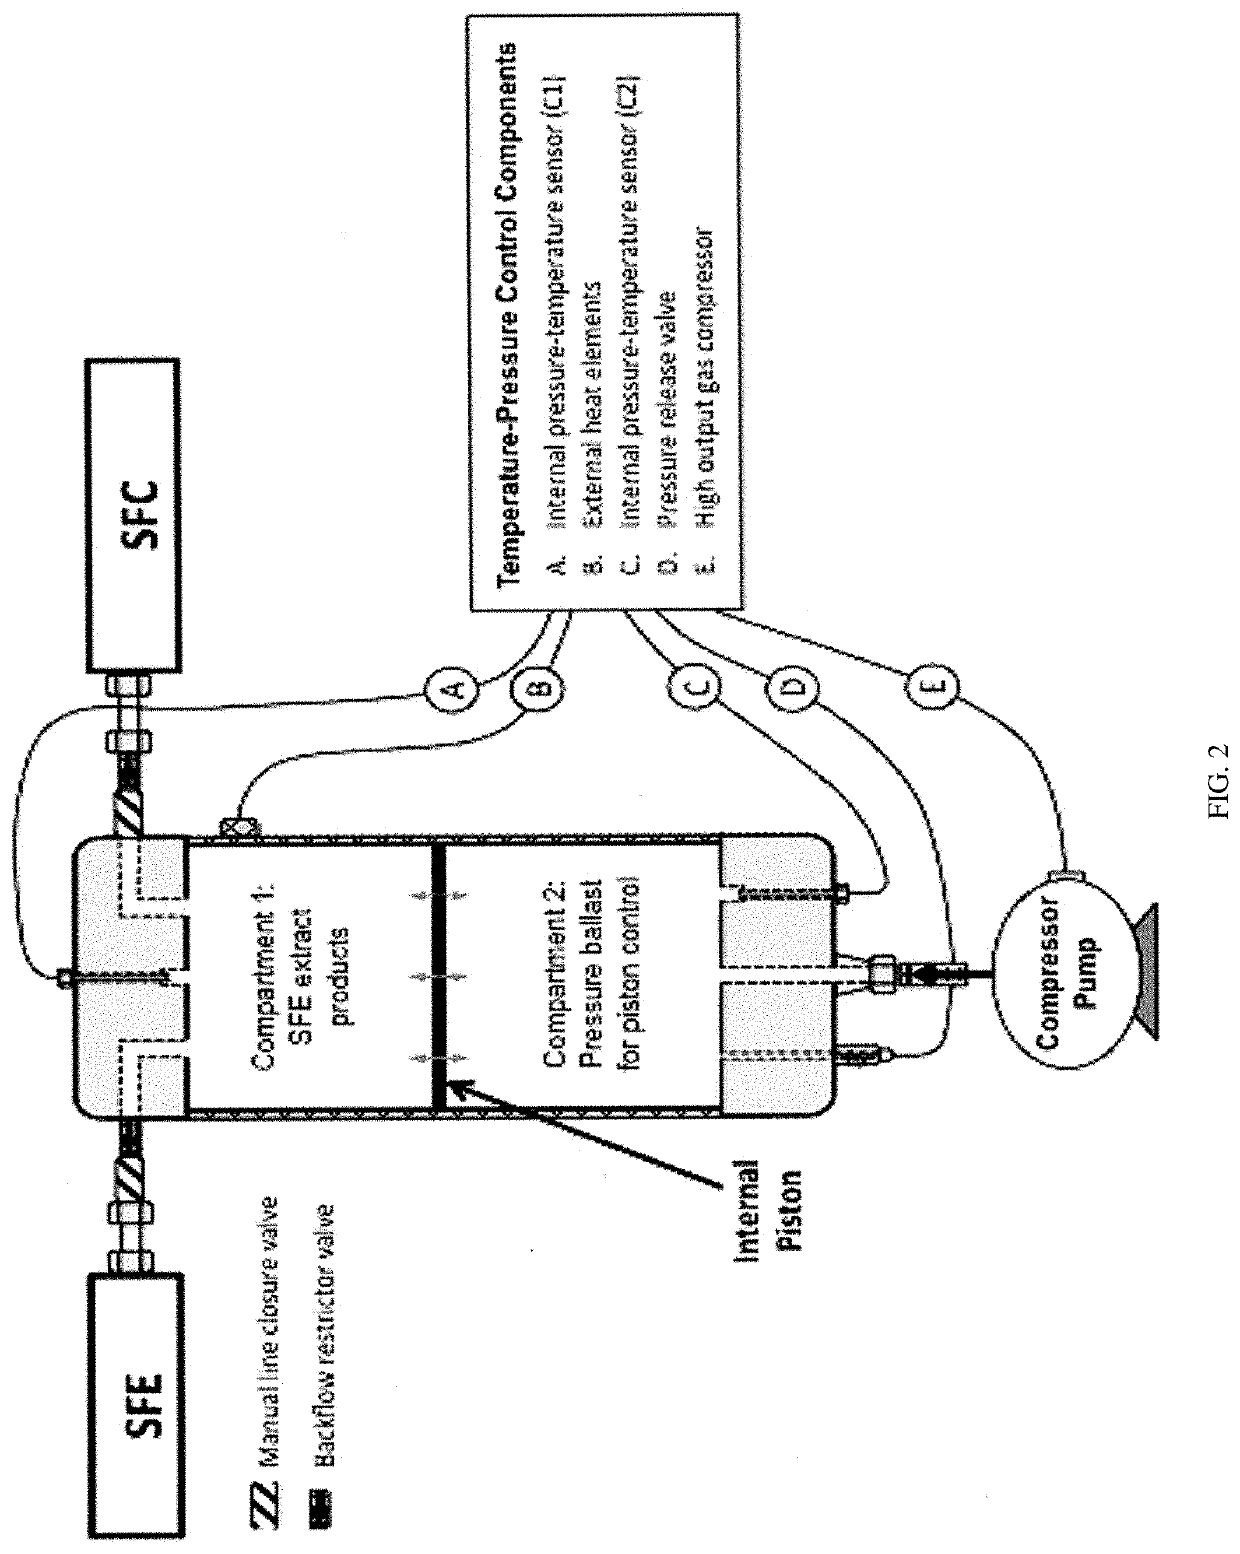 Dynamic interface system and its application in supercritical fluid extraction and chromatography